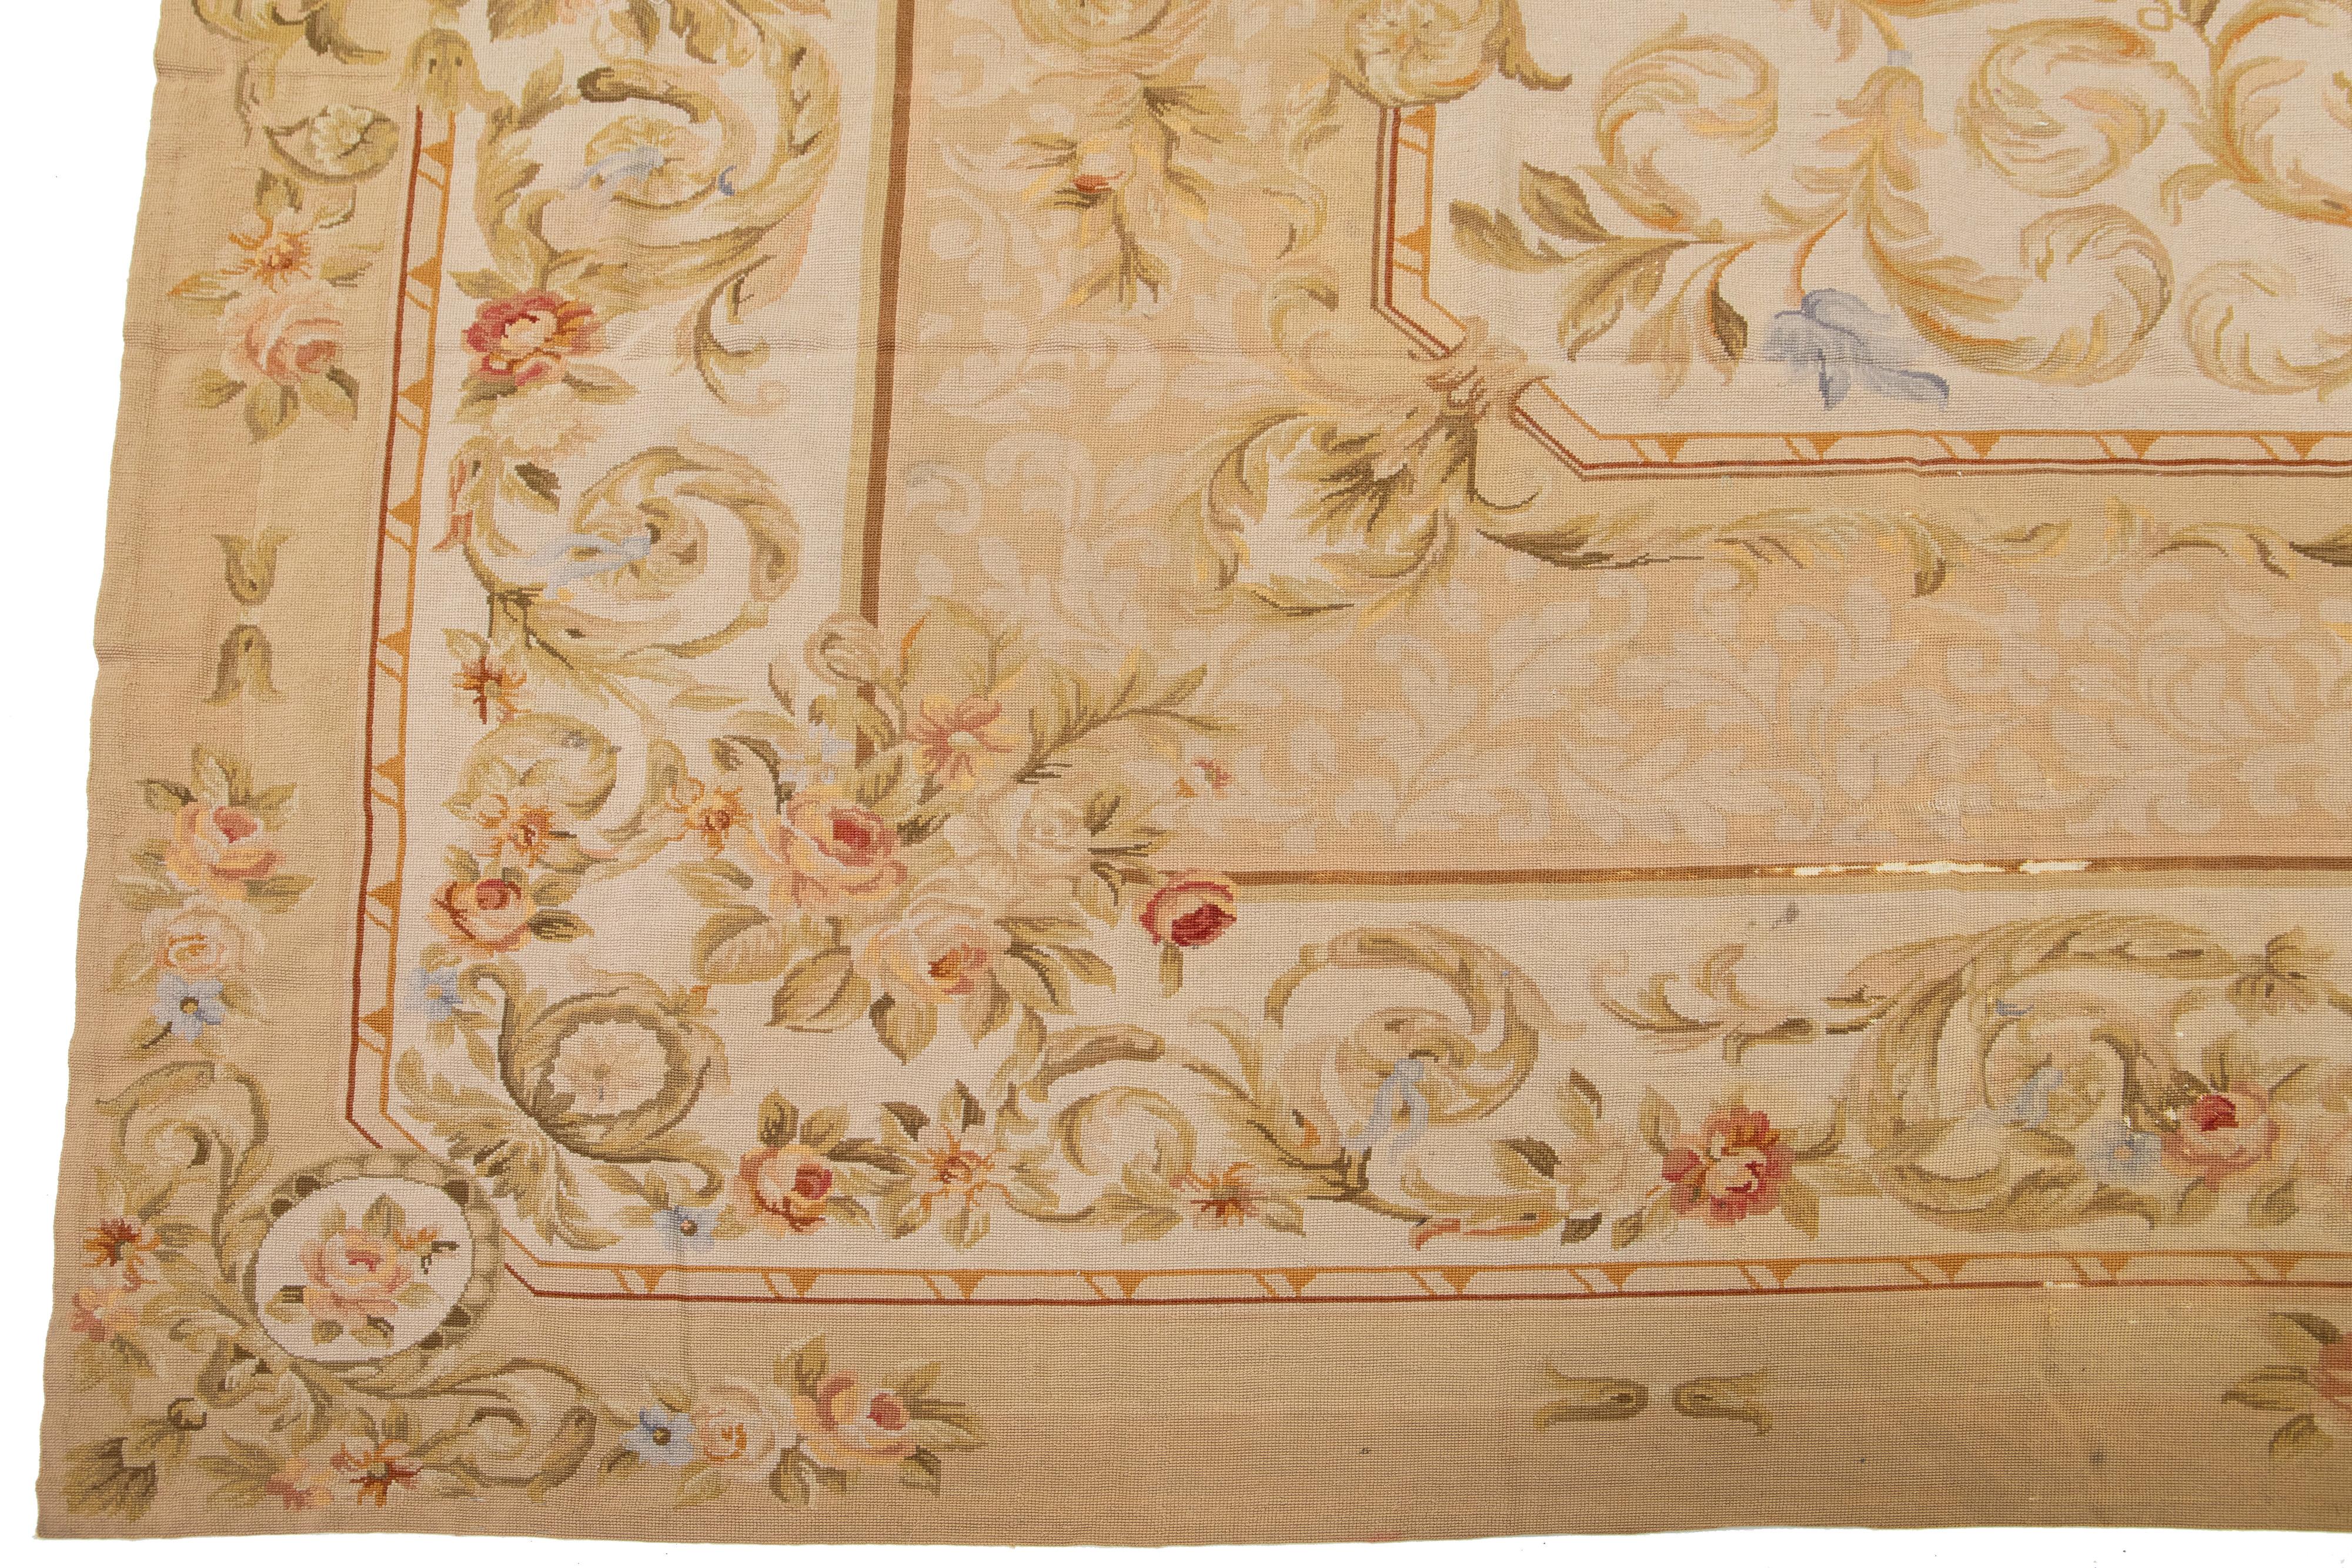 Vintage Portuguese Aubusson Needlepoint Wool Rug In Beige With Rosette Motif For Sale 1